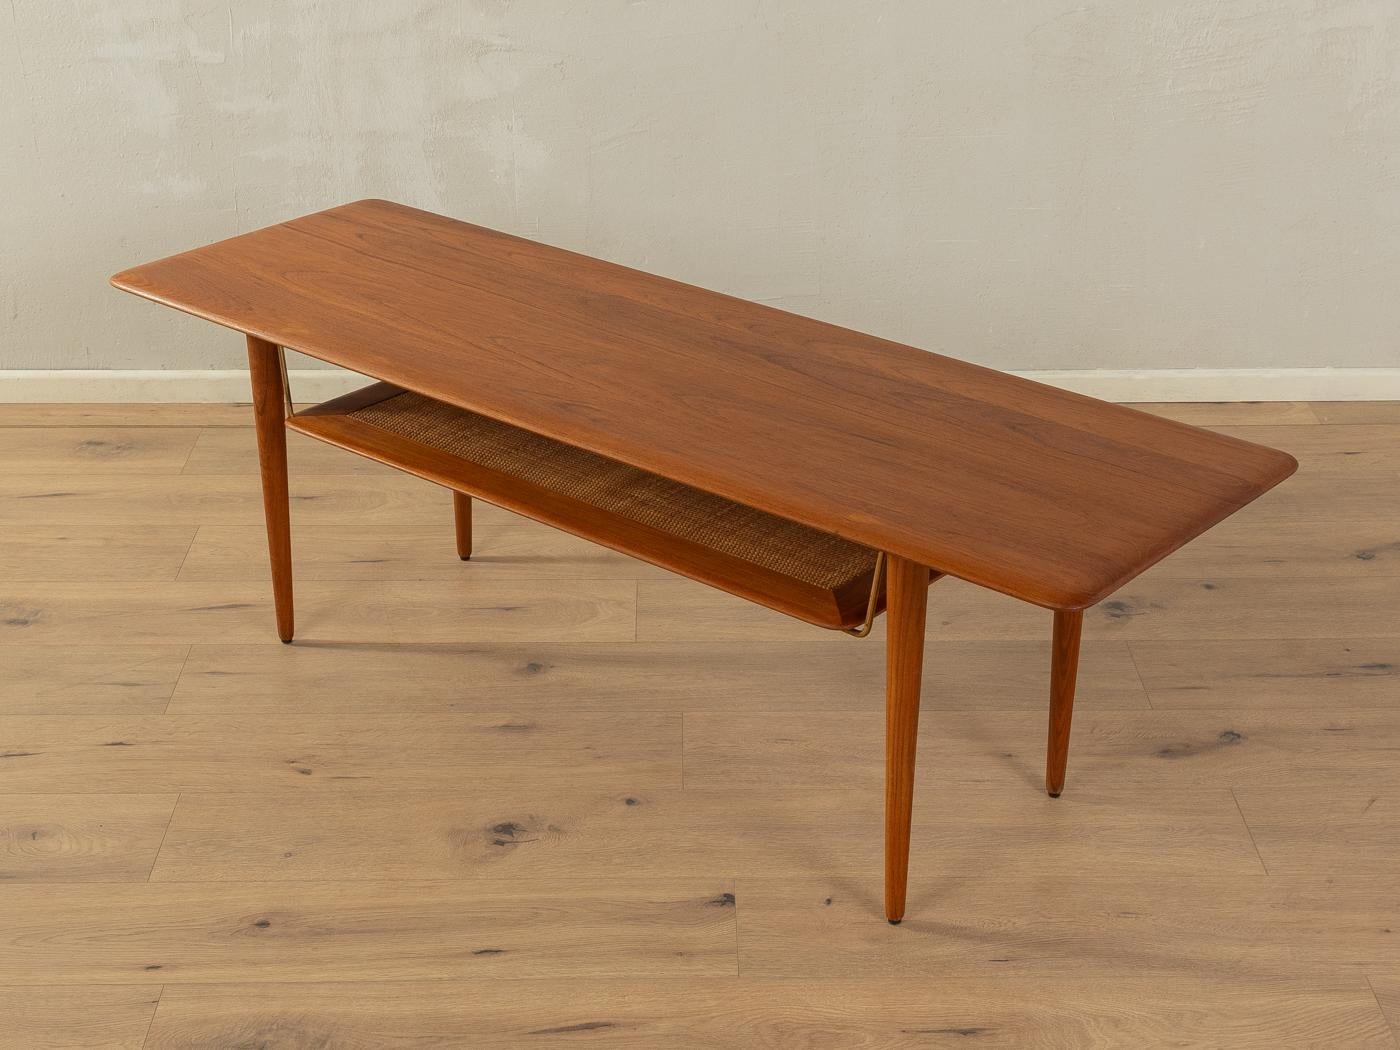 Classic coffee table from the 1960s by Peter Hvidt & Orla Mølgaard-Nielsen for France & Daverkosen. Rare model FD- 516. Frame and table top made of solid teak with an additional shelf made of rattan wicker supported by brass fittings.

Quality